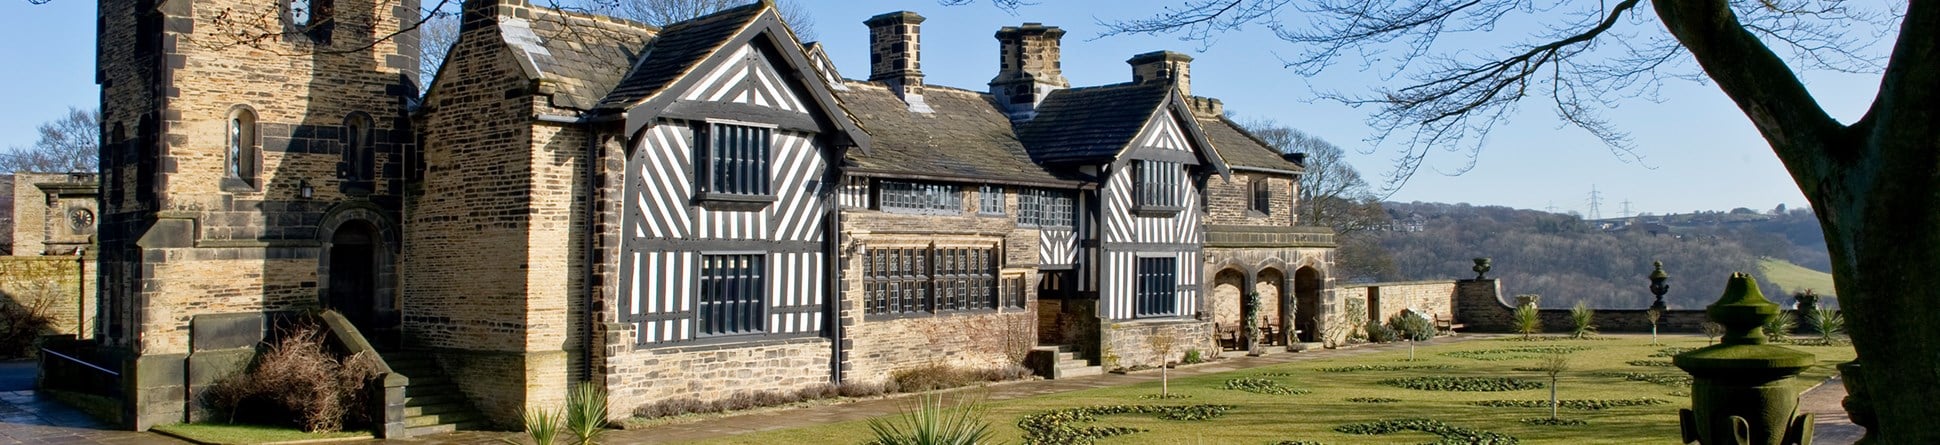 Photo of Shibden Hall, a long house with a mix of timber-framed and stonework walls. A stone tower stands slightly behind the house, closest to the camera. There are manicured gardens before the house and the path is lined with stone urns.